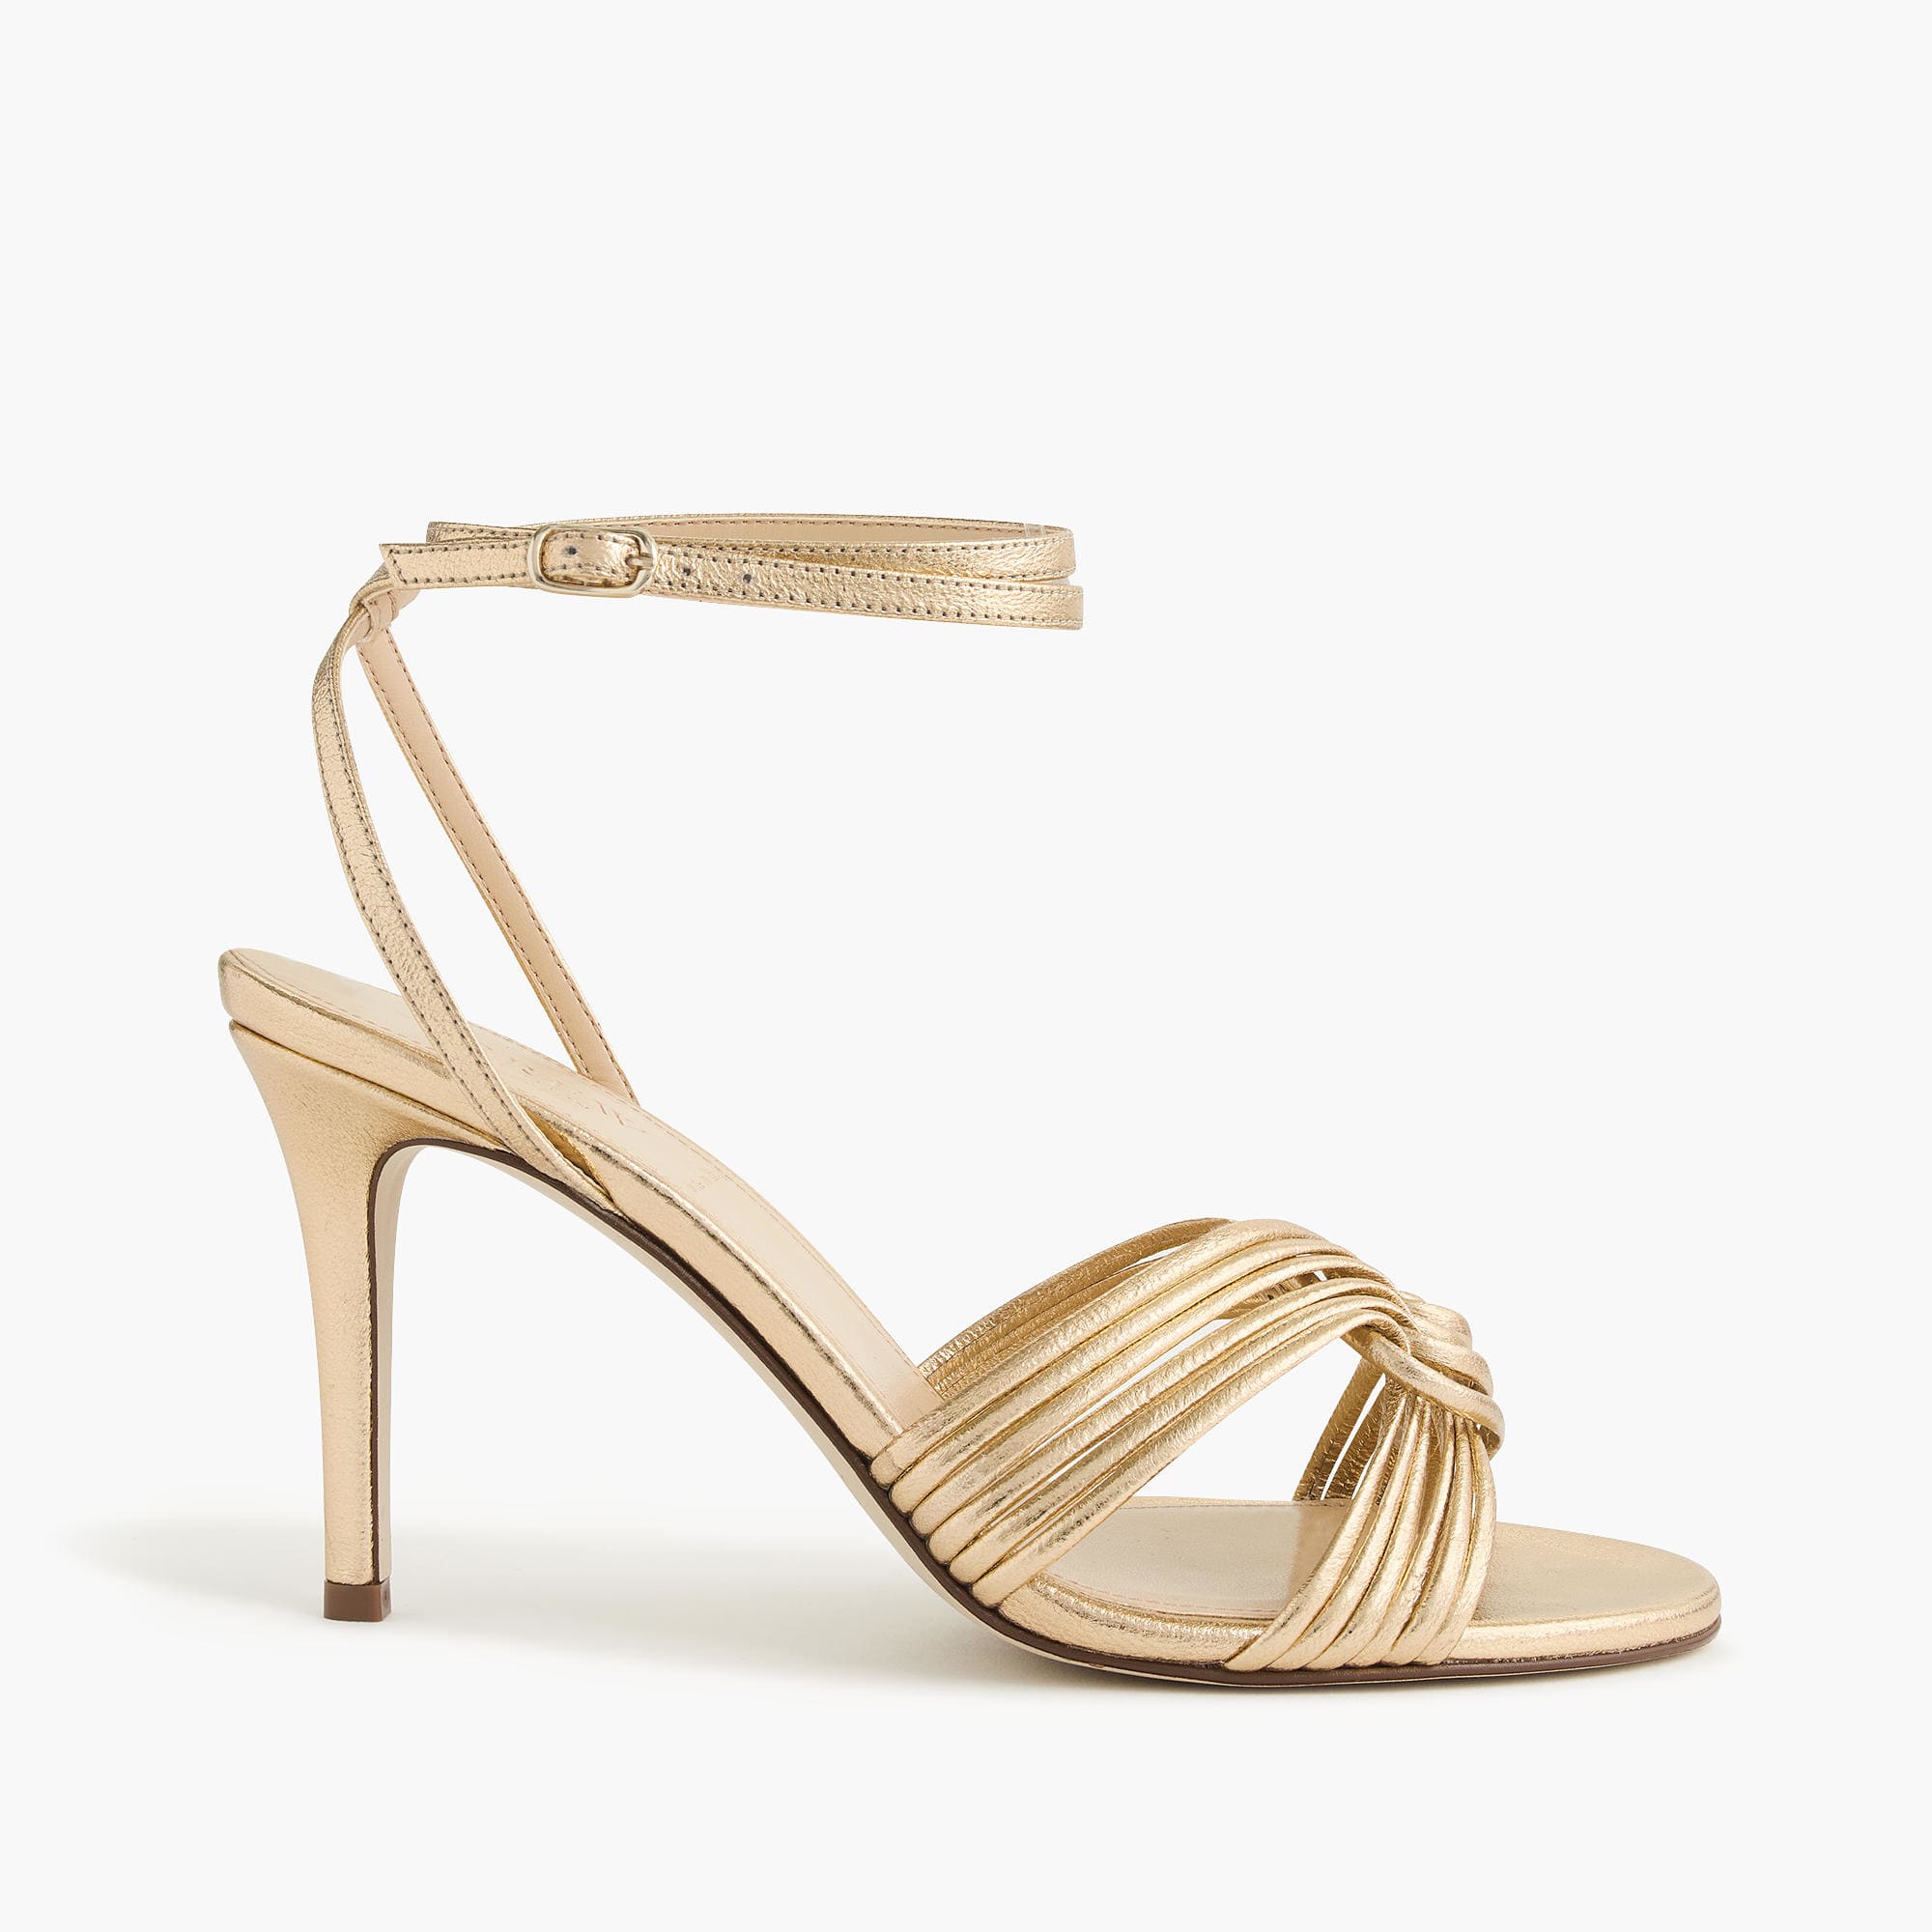 Sexy Metallic Gold Strappy High Heel Pumps · KoKo Fashion · Online Store  Powered by Storenvy